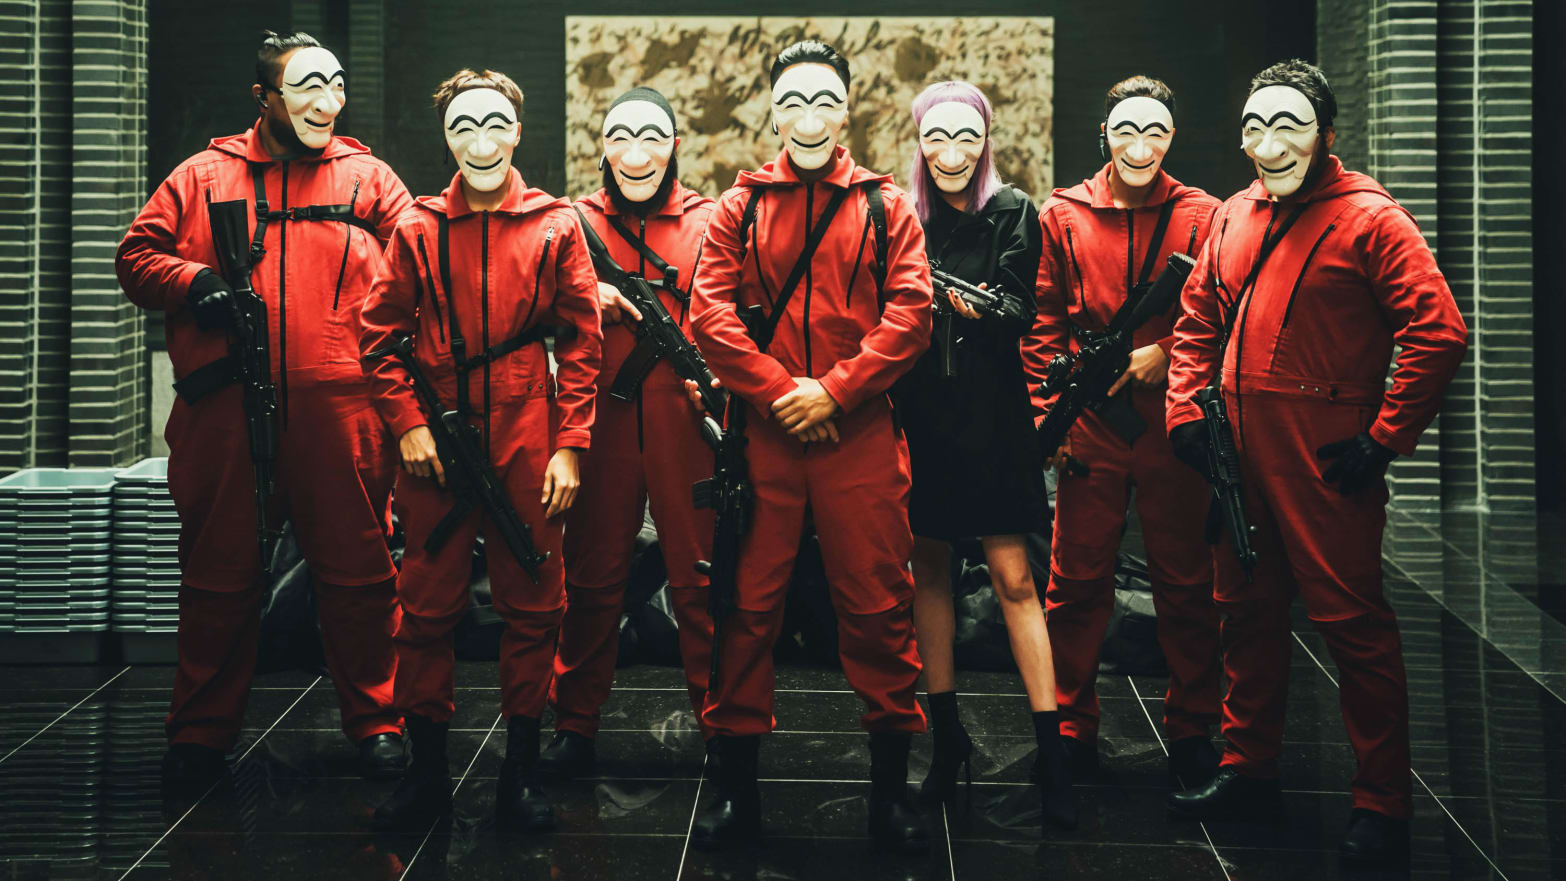 In the show Money Heist, what is Tokyo's role in the actual heist